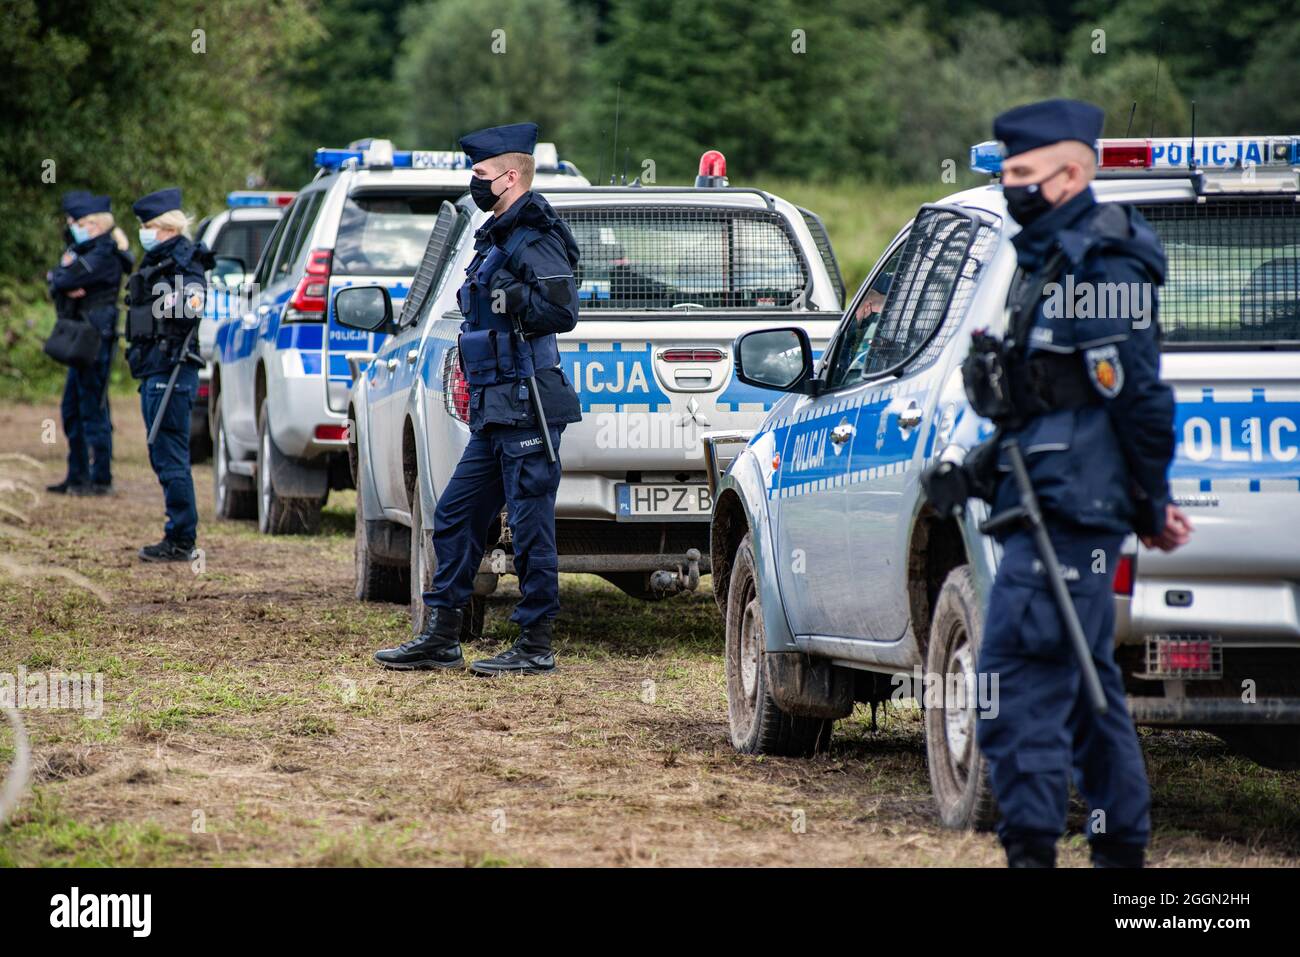 Police officers next to the village of Usnarz Gorny are standing on guard on the field next to a makeshift camp where a group of migrants stay and not being let into the Polish side. The Polish government is introduce a State of Emergency on the border with Belarus in two voivodeships (the highest-level administrative division of Poland) to stop migrants crossing illegally. Under a state of emergency, Polish authorities will have the power to restrict the movement of people, including aid organisations or press in border areas. It's the first such measure since the 1981 declaration of martial Stock Photo